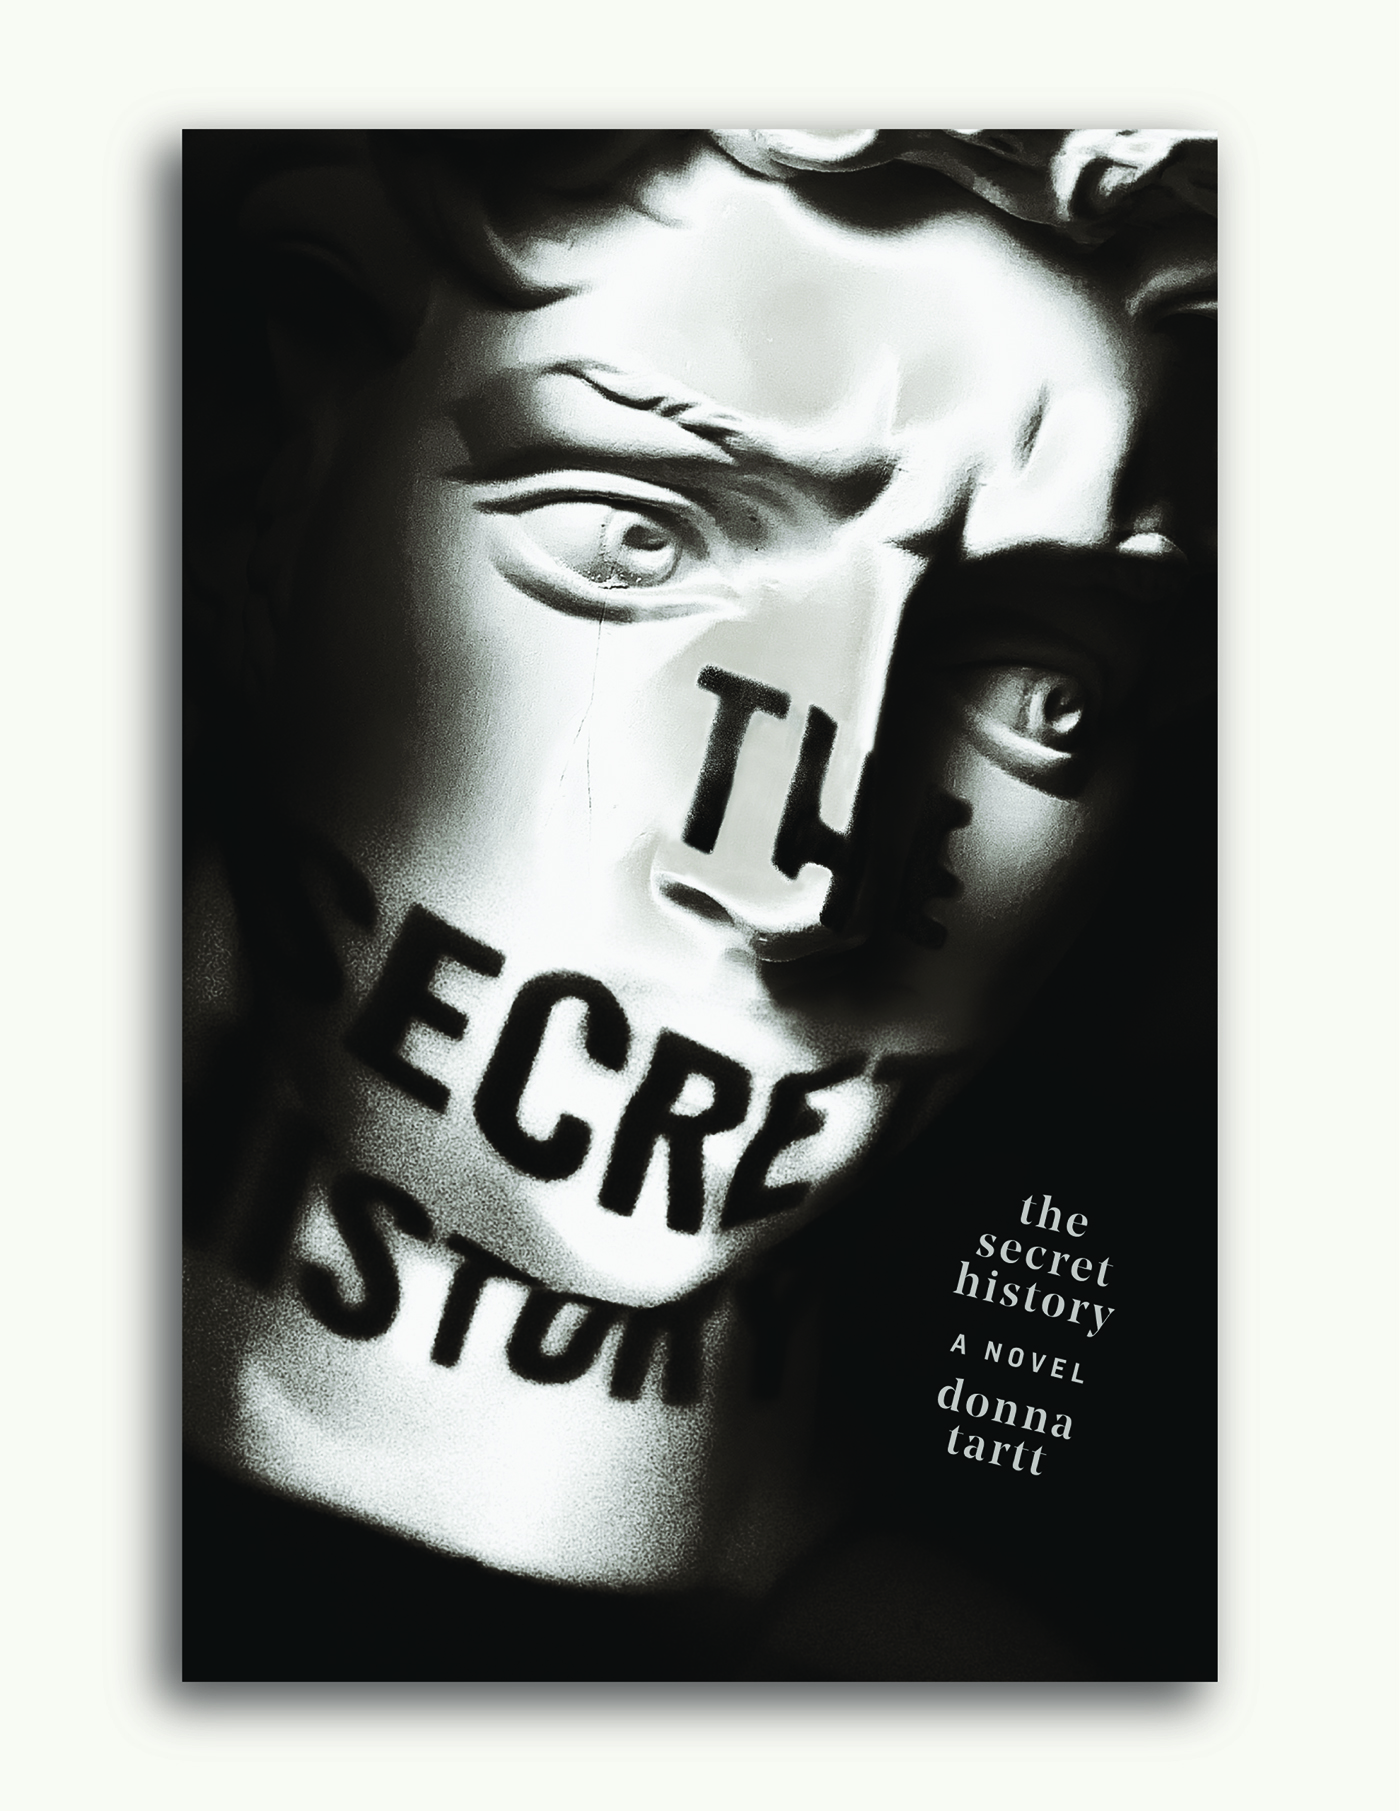 Book cover for the novel The Secret History.